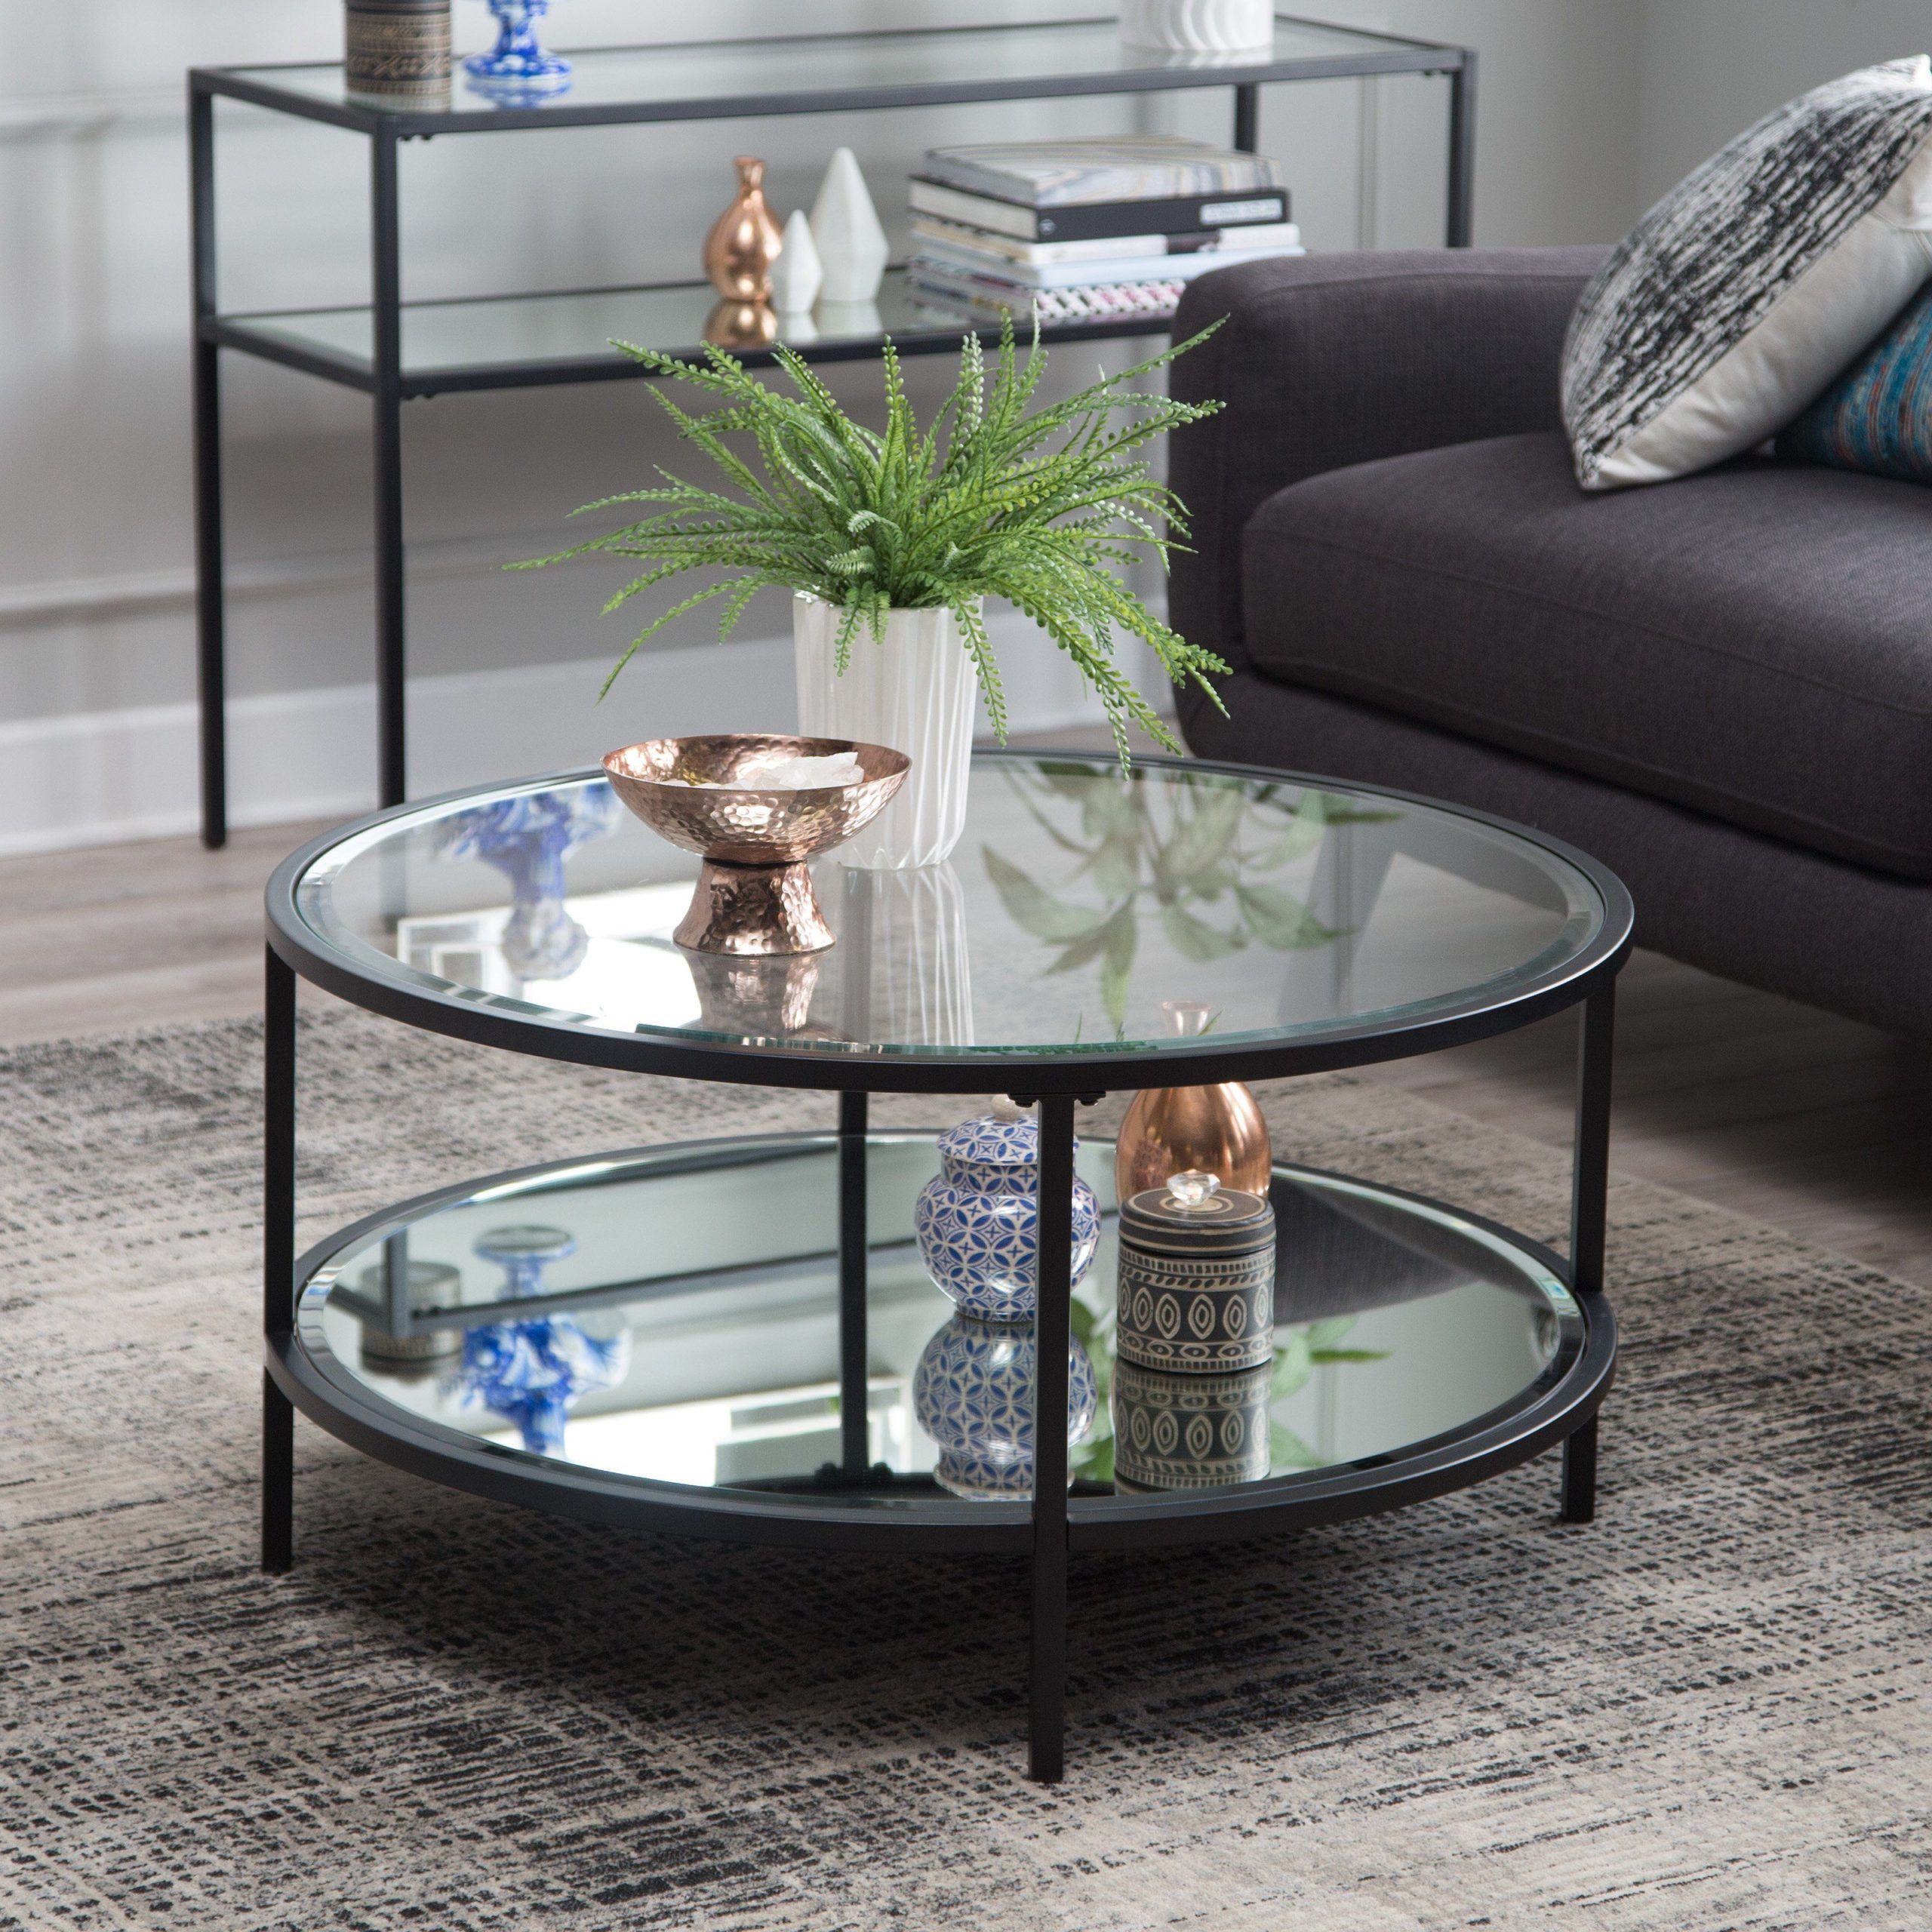 Widely Used Full Black Round Coffee Tables Intended For Belham Living Lamont Round Coffee Table – Black (Photo 6 of 15)